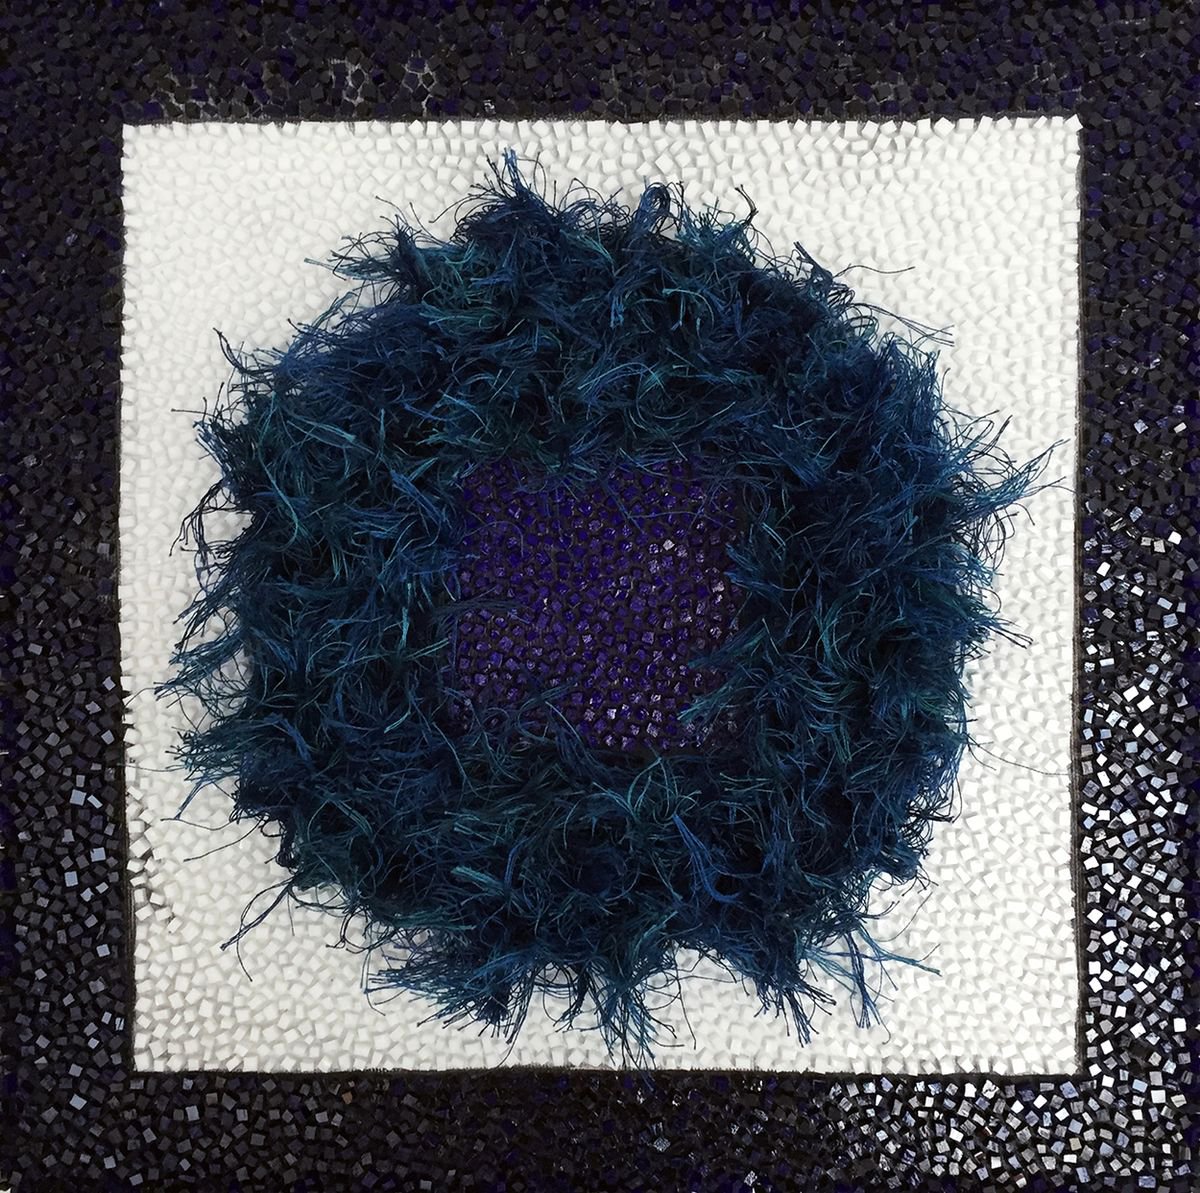 Square In A Circle by Lisa Allegretta